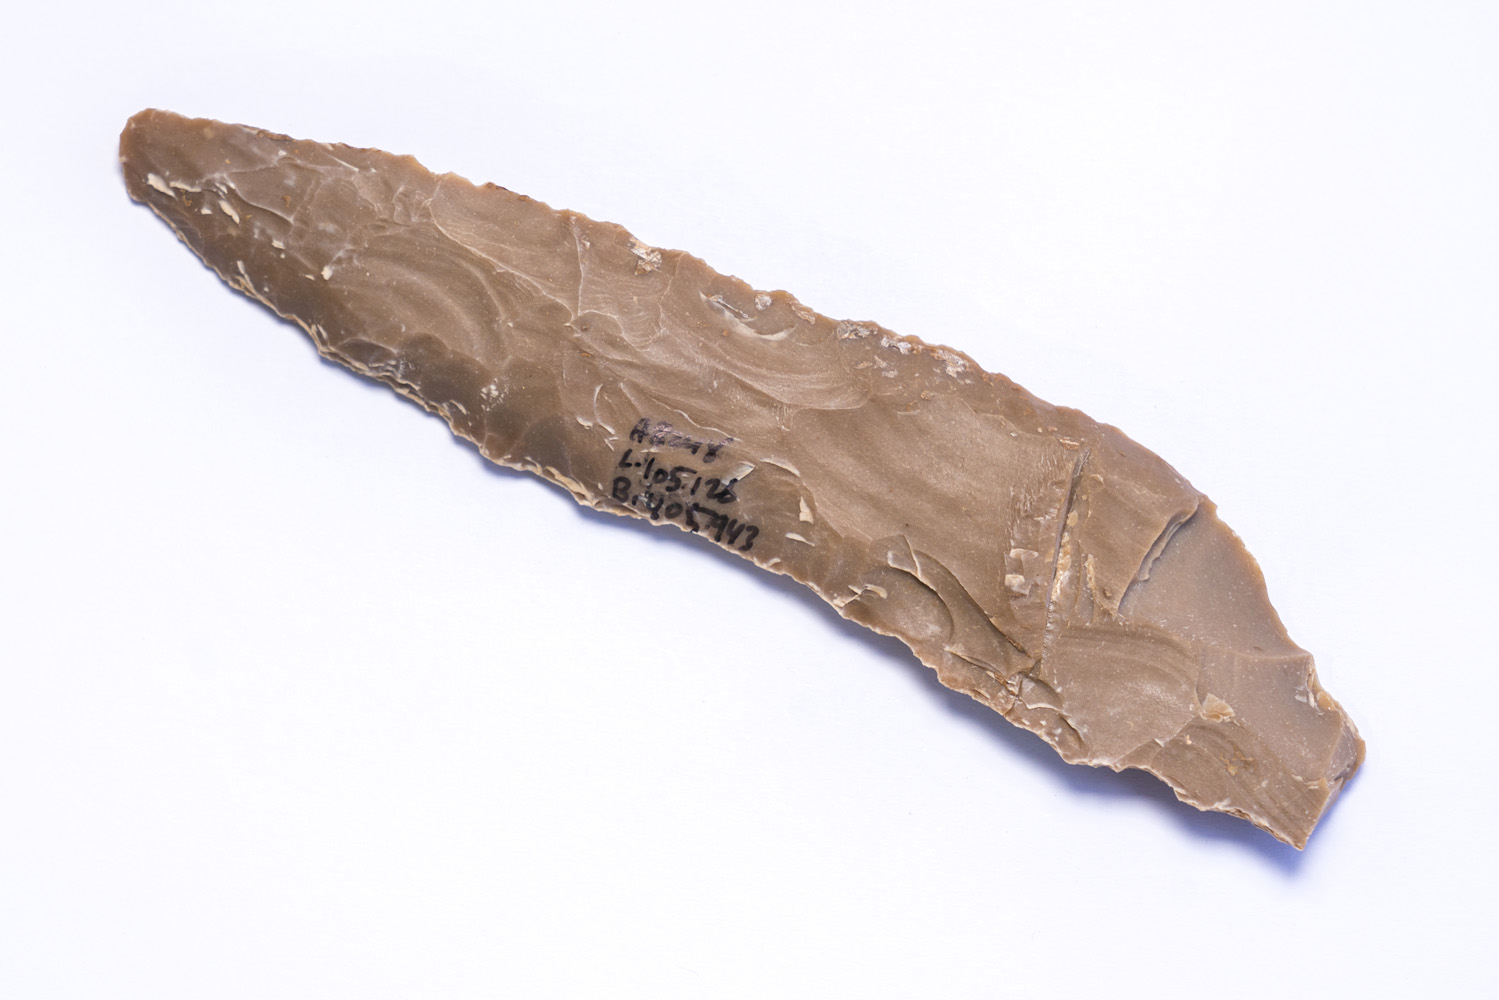 Flint knife. One of the thousands of flint tools found on the site. 